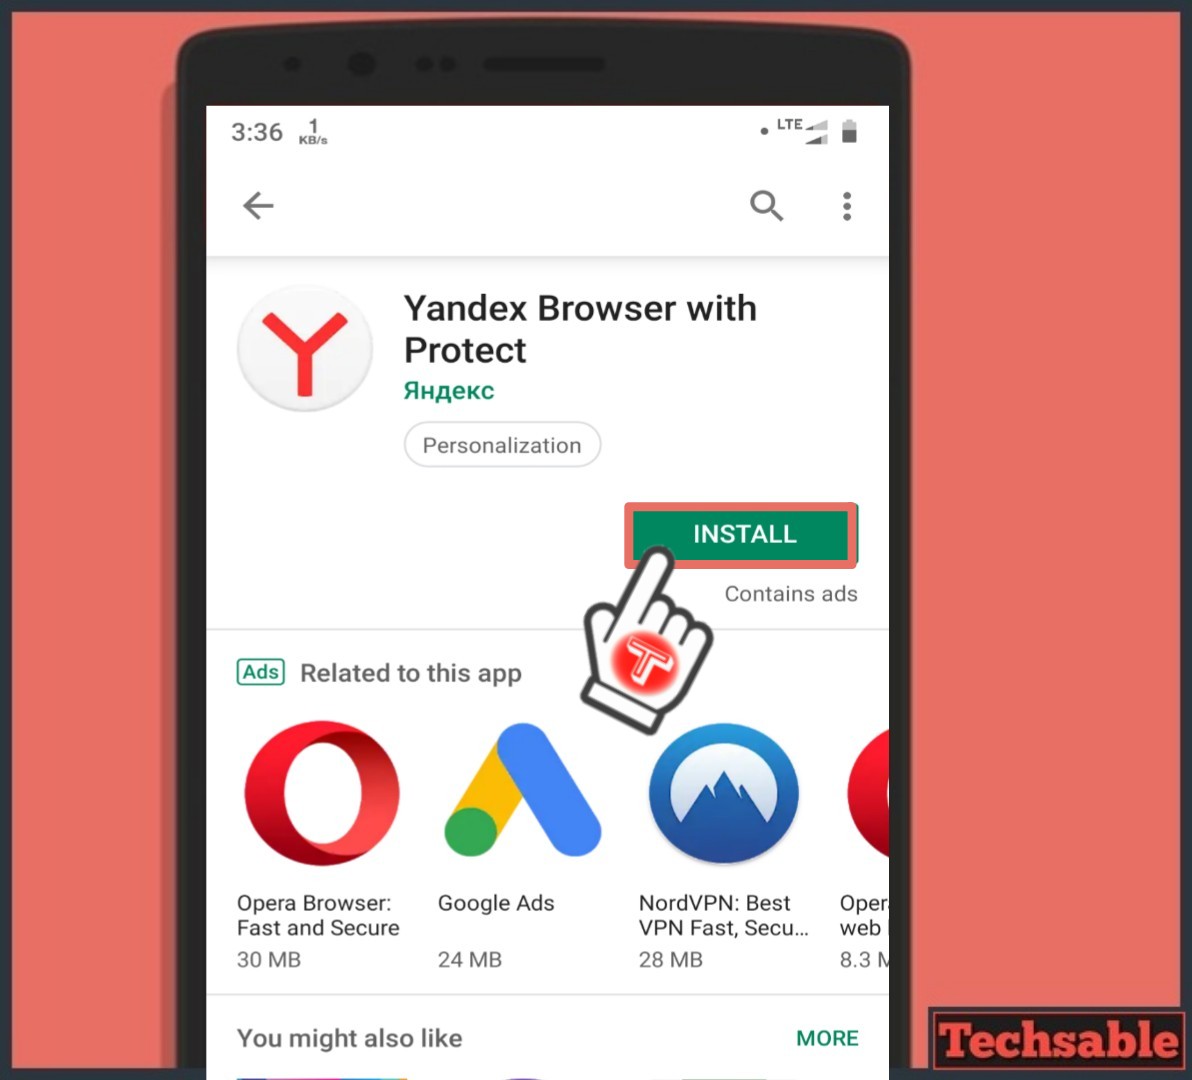 yandex browser with protect android